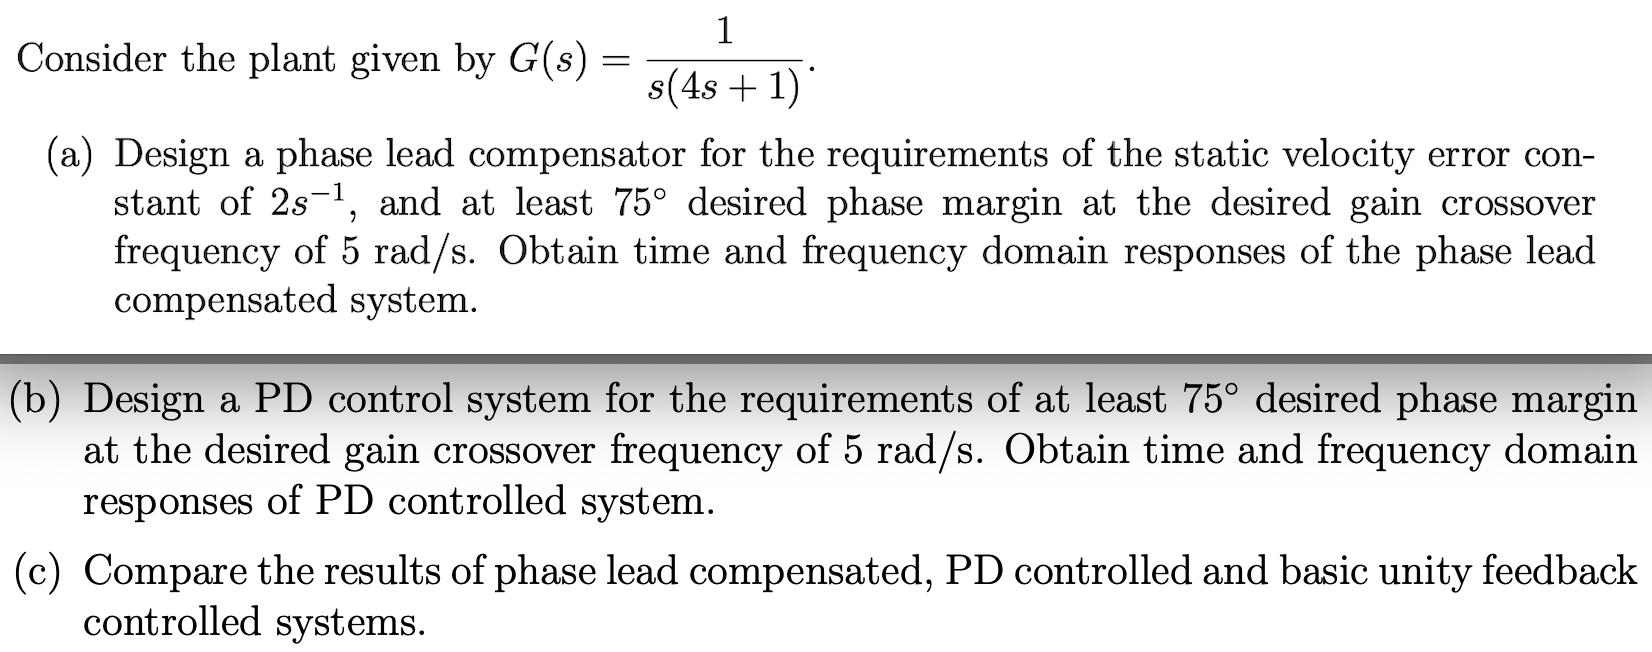 Consider the plant given by G(s) = 1 s(4s + 1) (a) Design a phase lead compensator for the requirements of